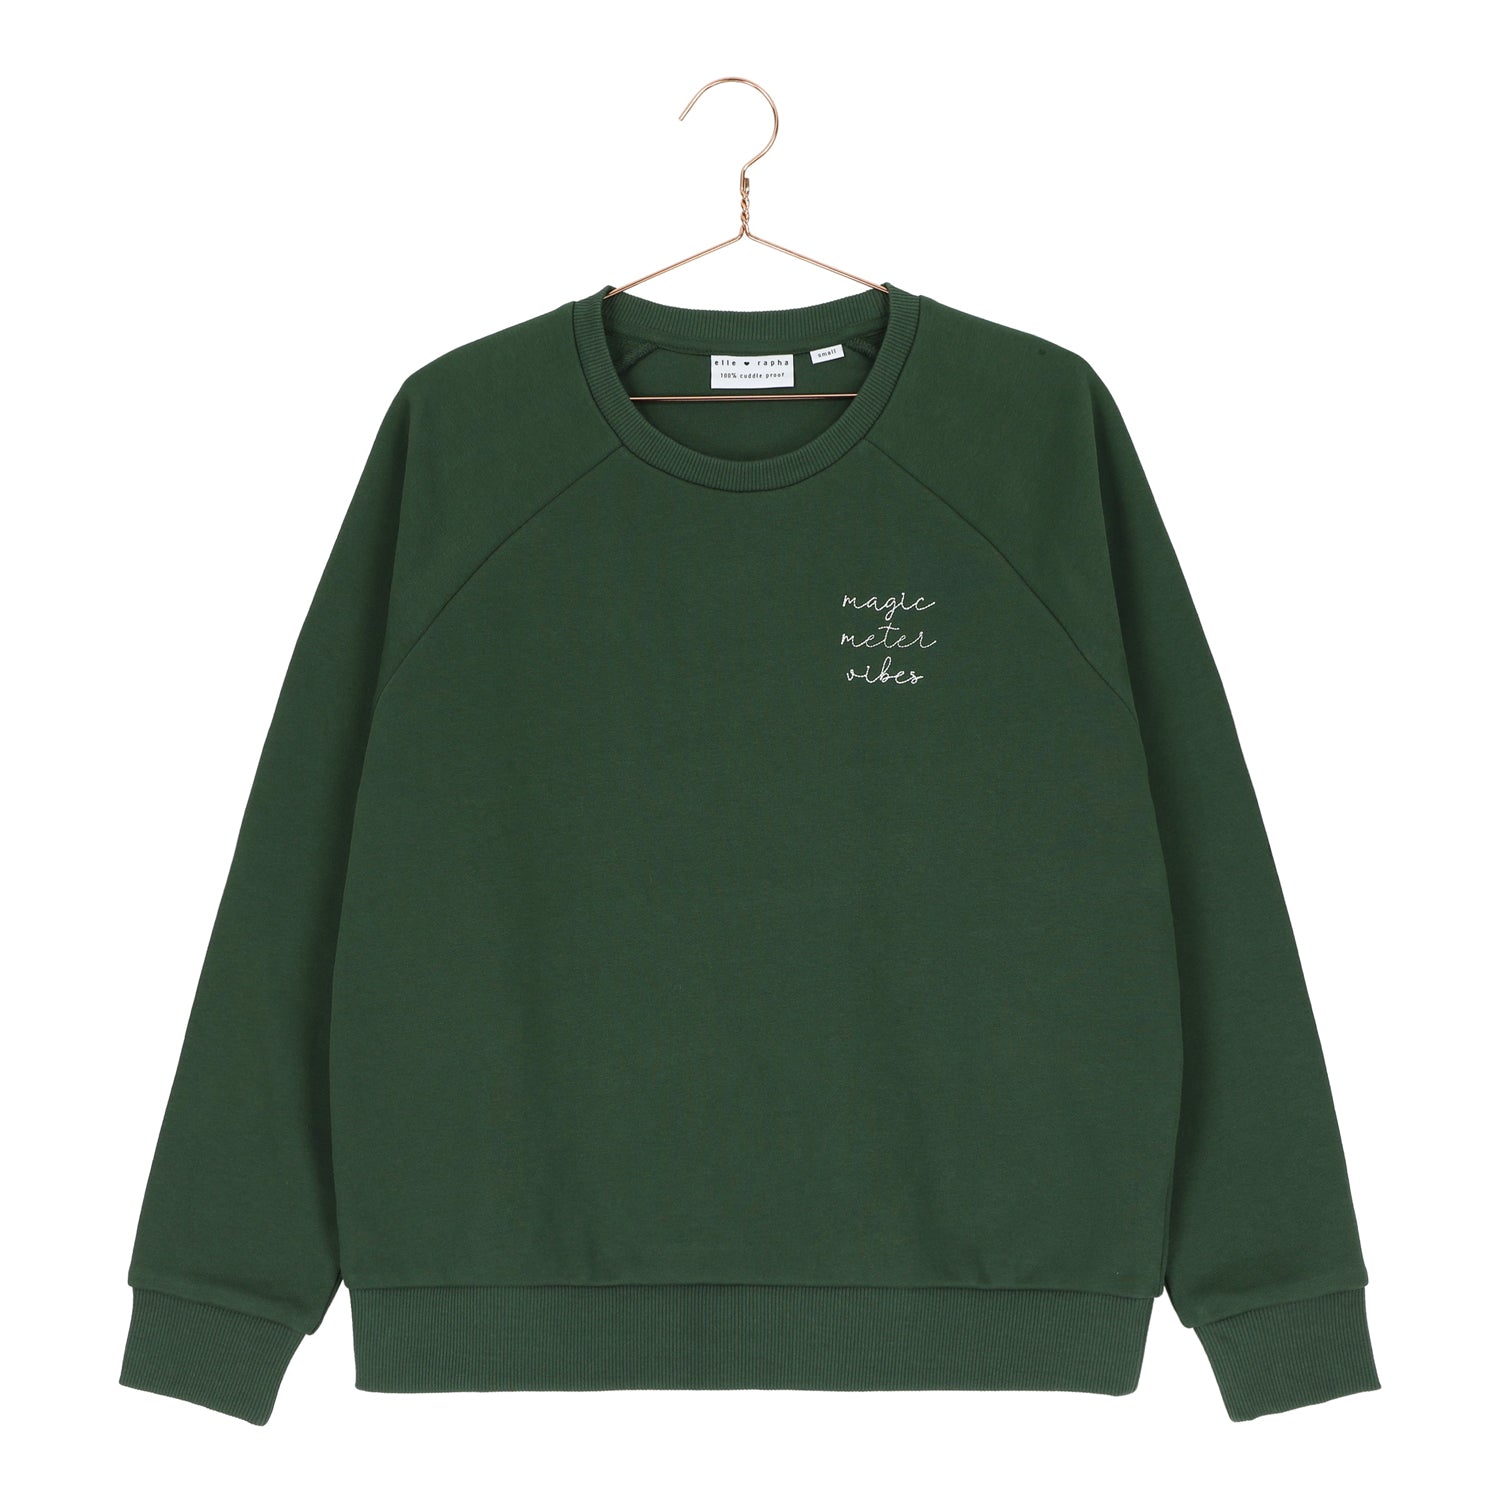 evergreen METER (white embroidery)